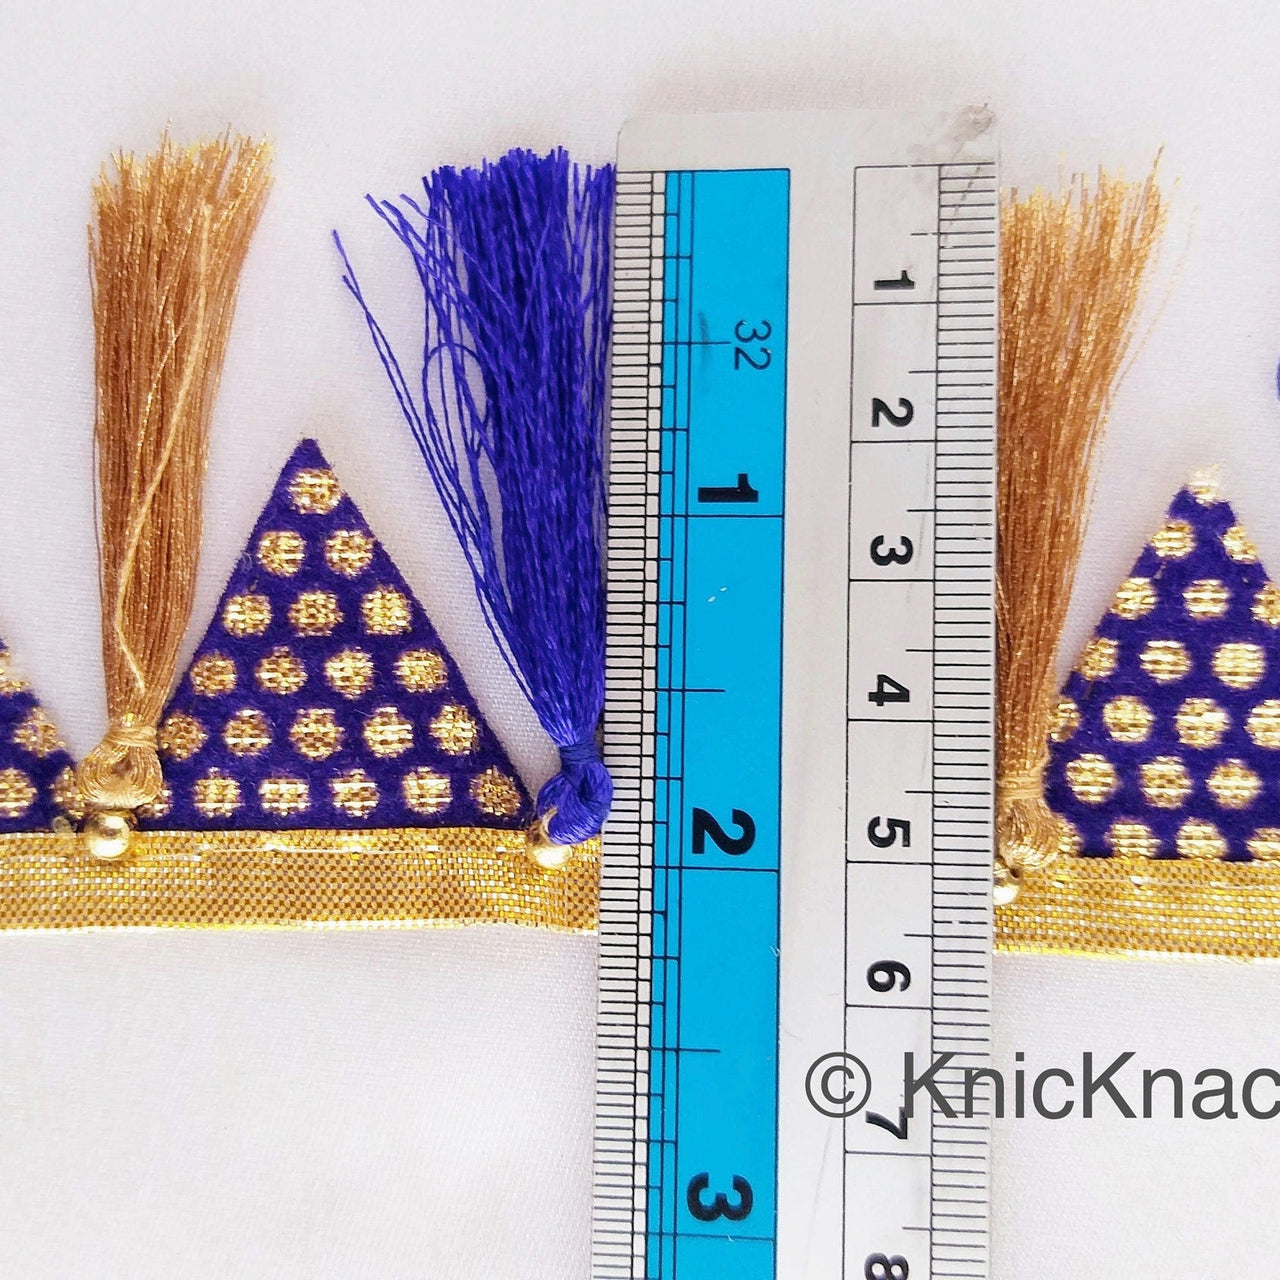 Gold Fringe Bunting Trim In Royal Blue & Gold Check Pattern With Royal Blue And Copper Thread Tassels, Decorative Trim, Tassels Trim